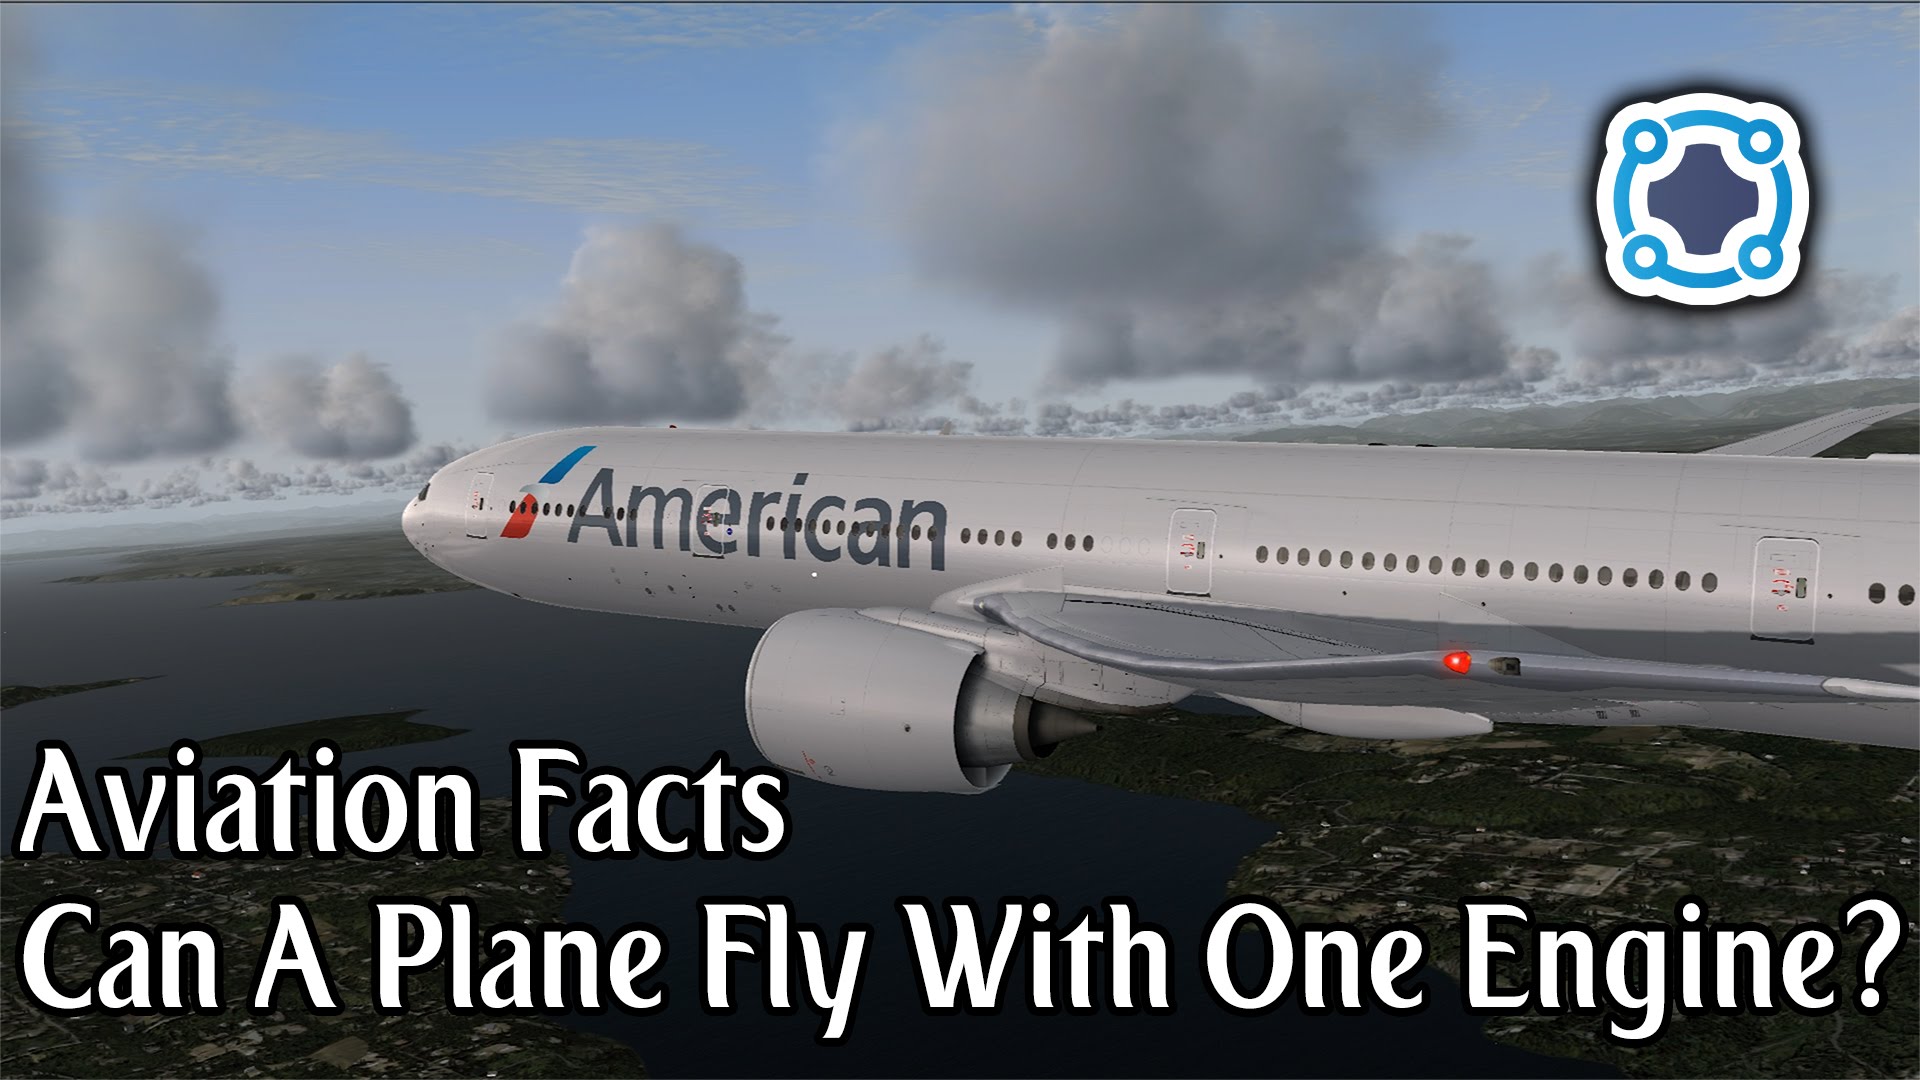 Can A Plane Fly With One Engine?